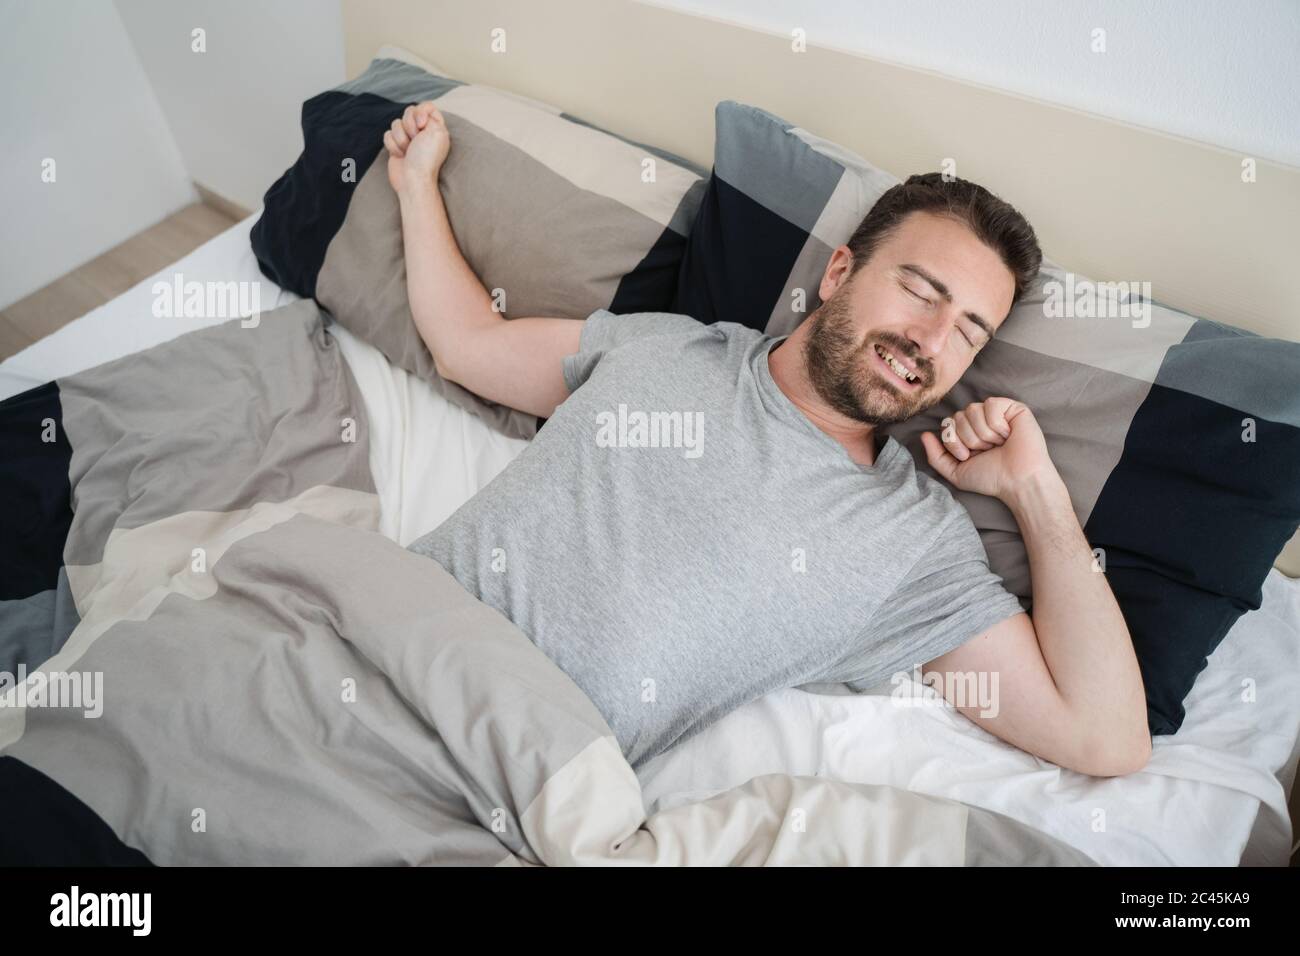 Relaxed guy napping in his bed at home Stock Photo